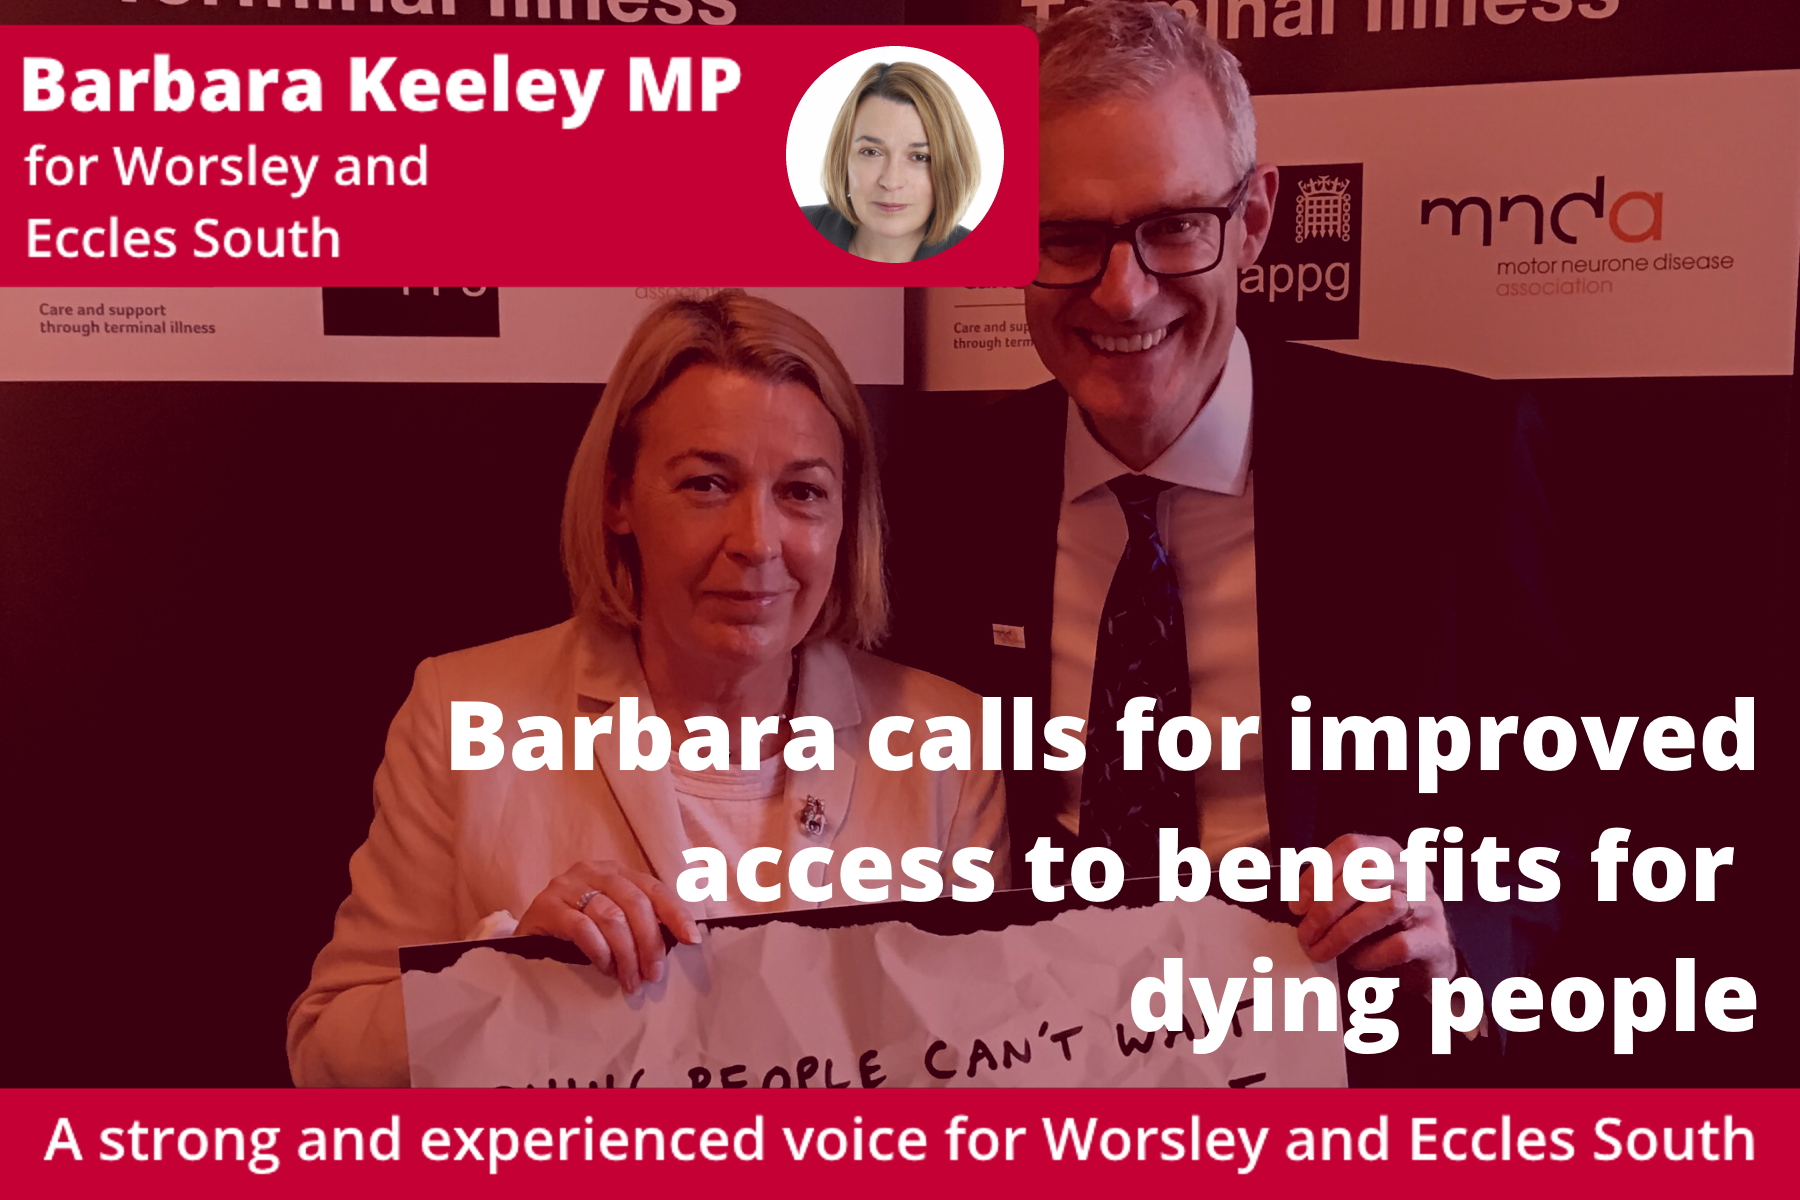 Barbara calls for improved access to benefits for dying people